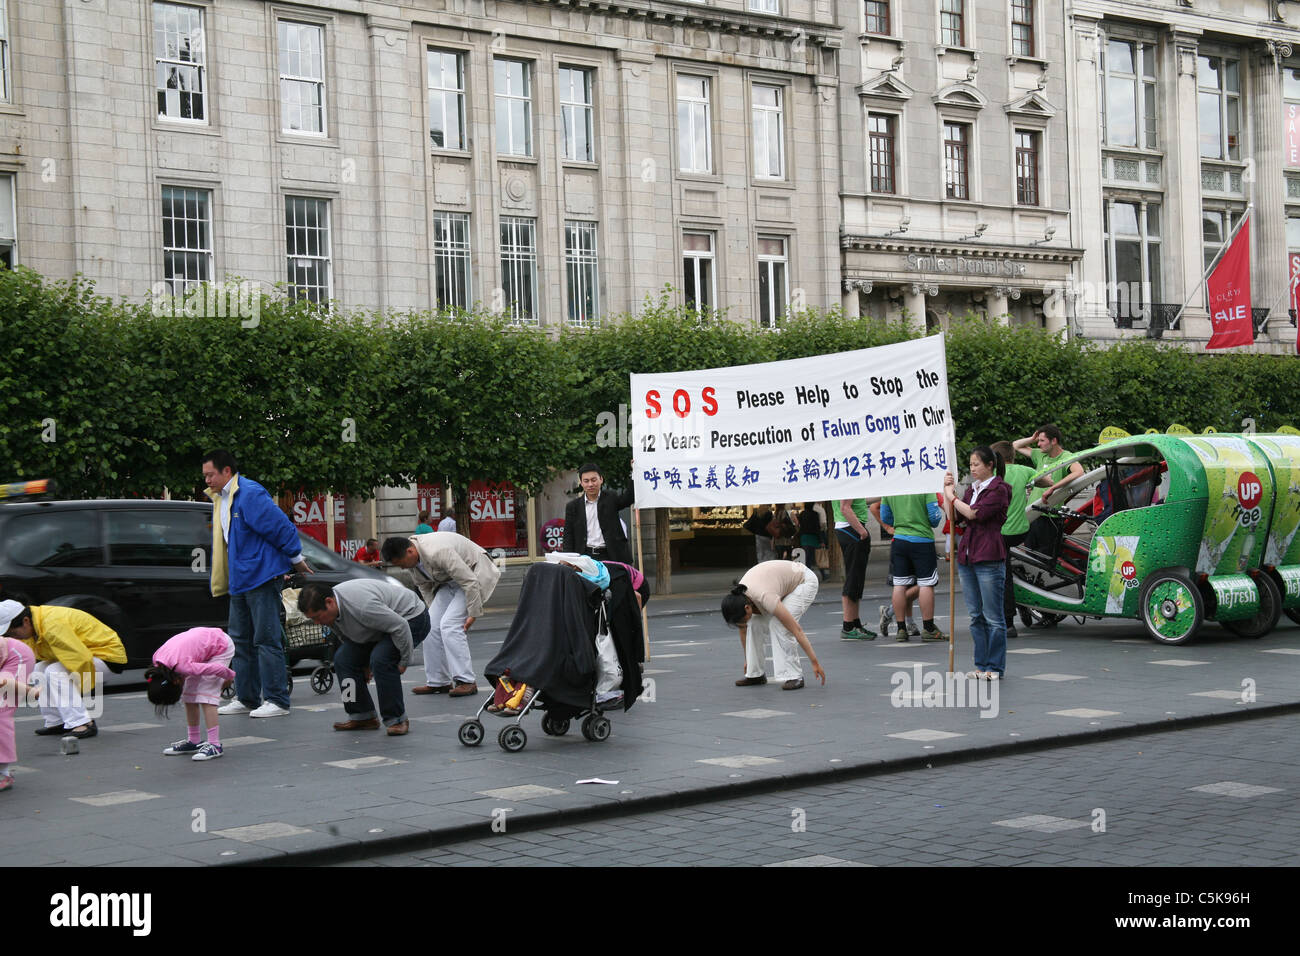 Falun Gong protosters in O'Connell Street Dublin Ireland Stock Photo